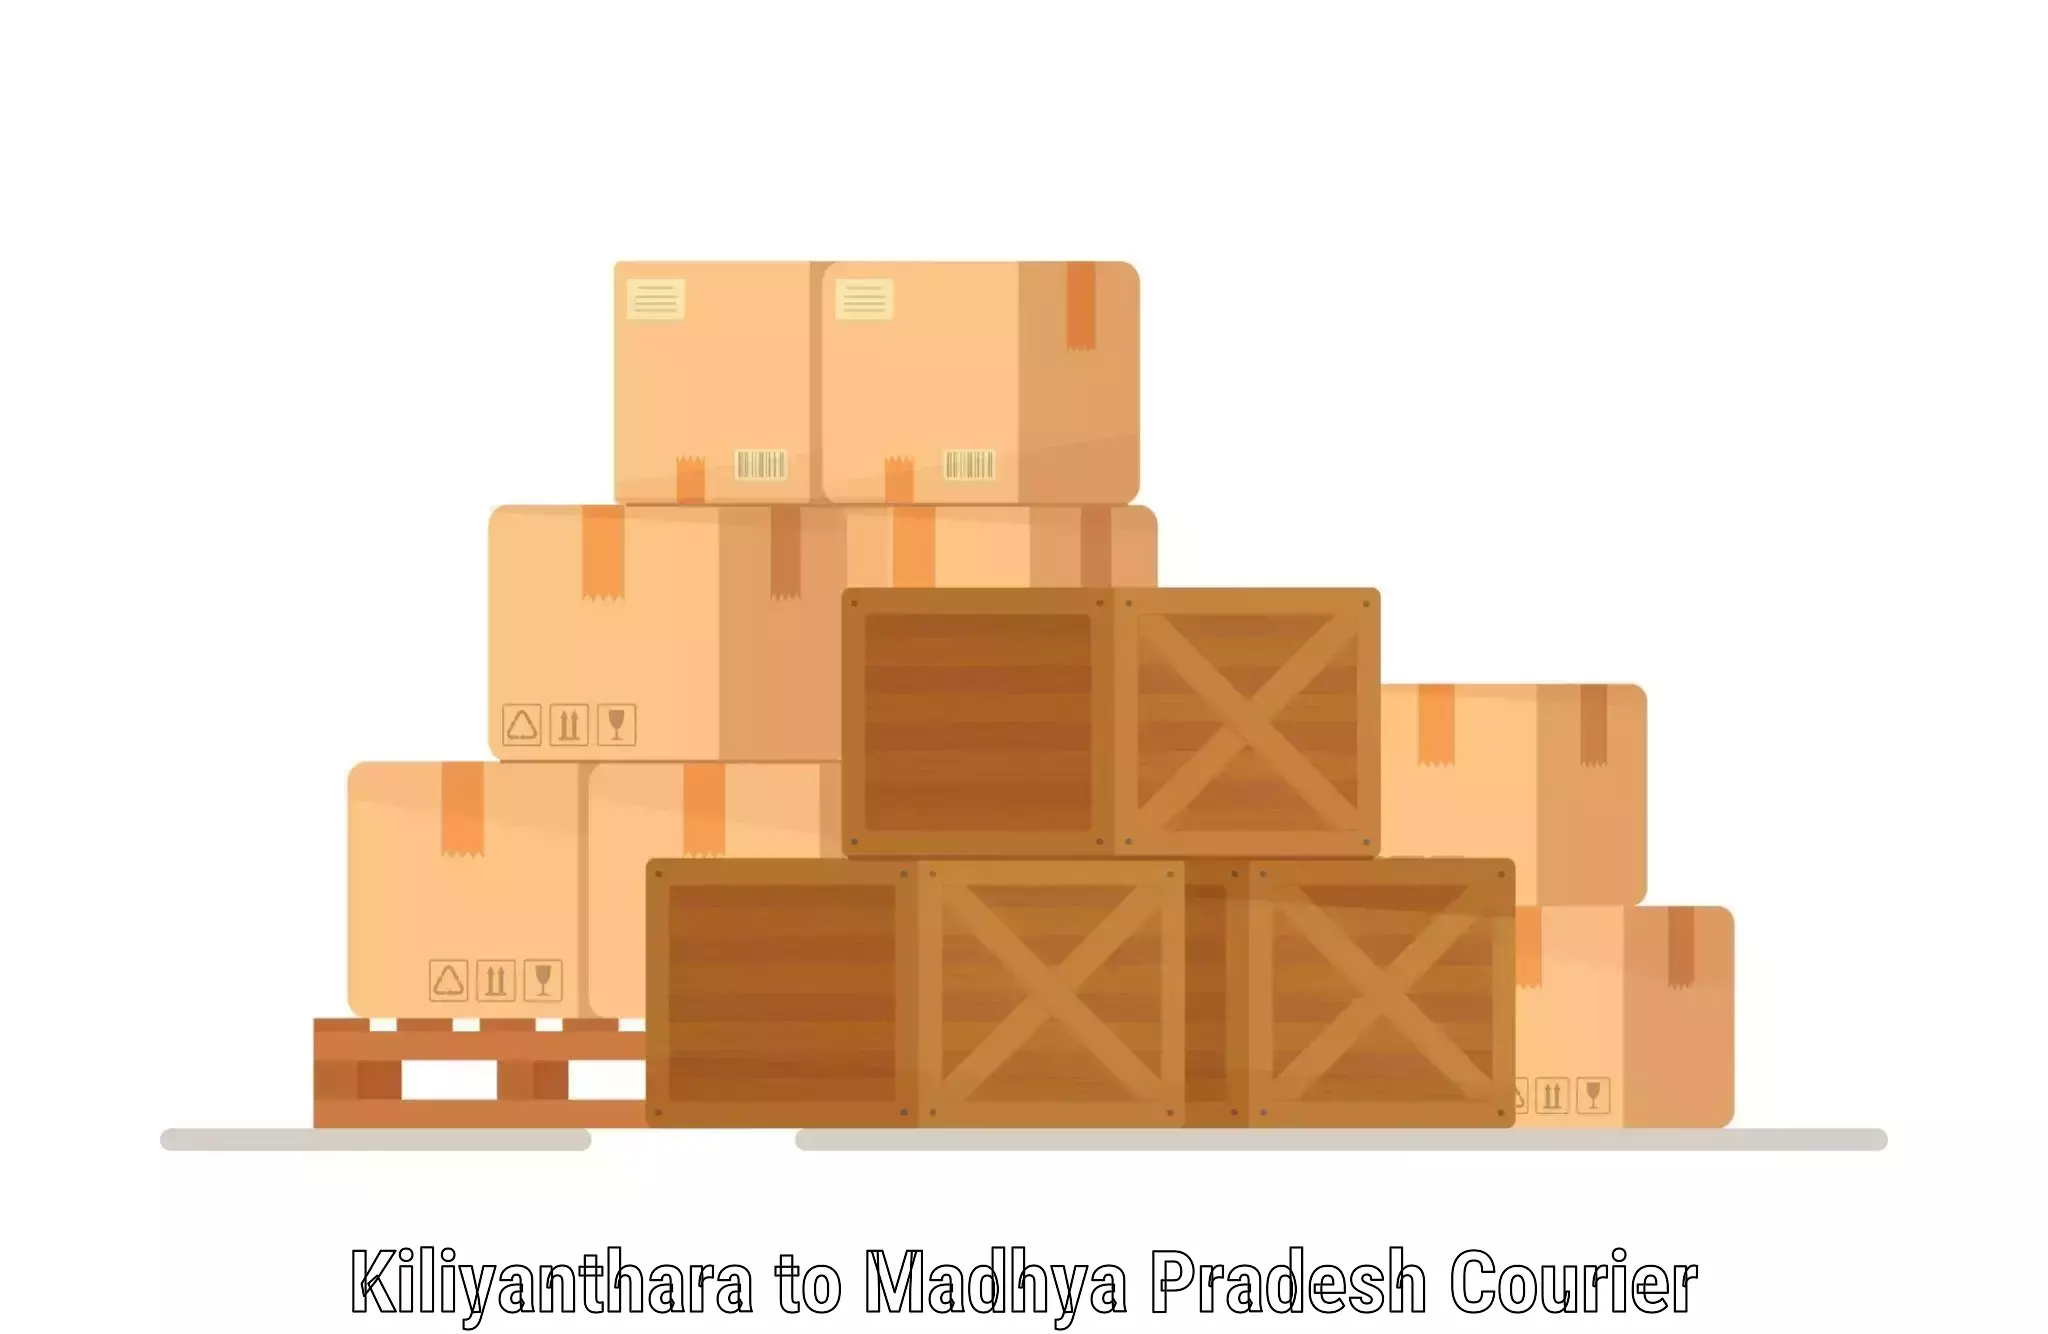 Personalized courier experiences in Kiliyanthara to Kesali